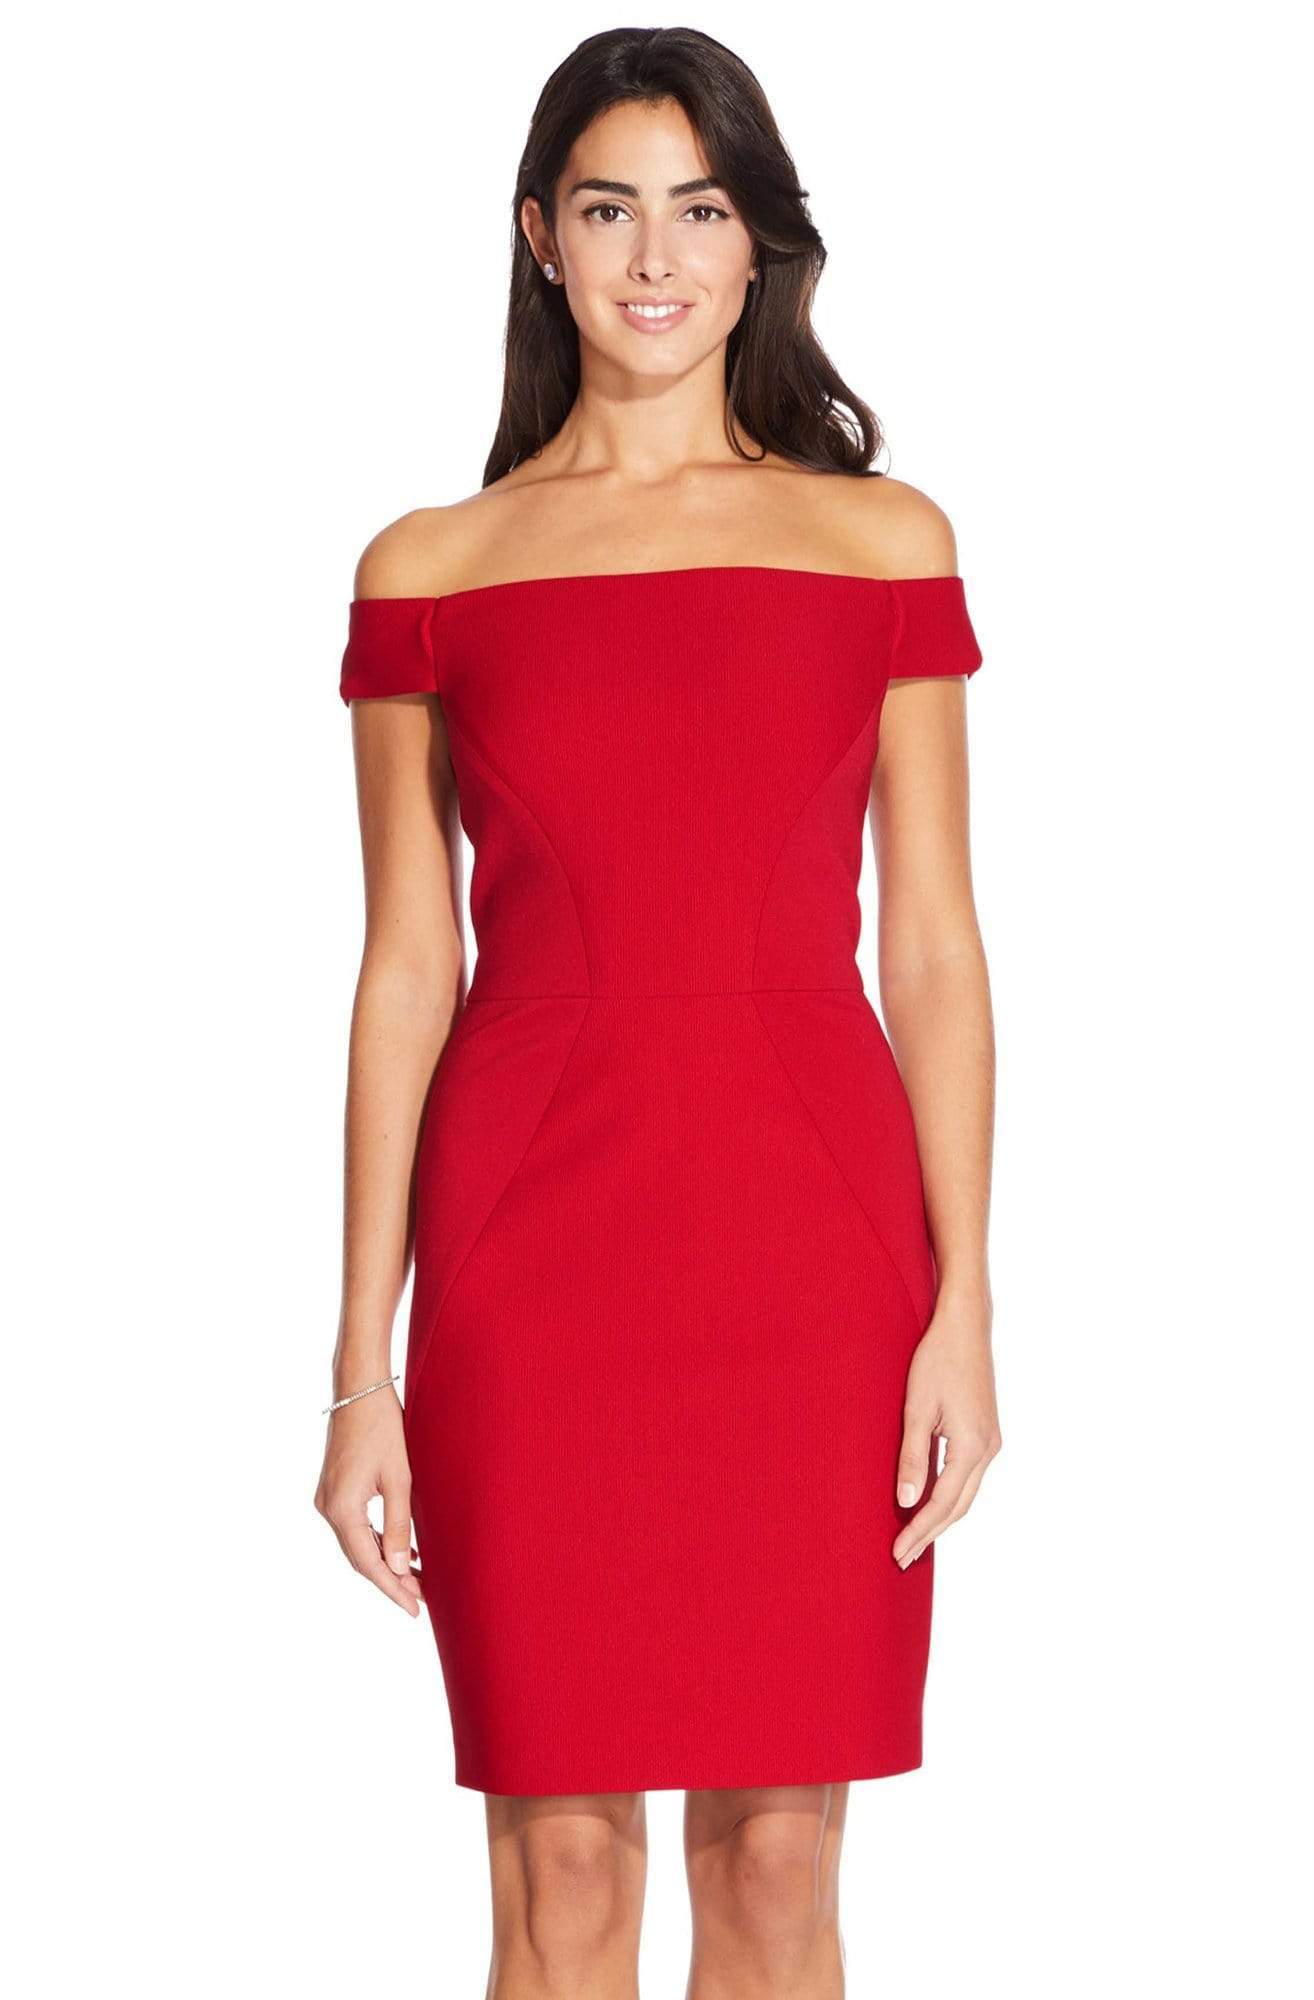 Adrianna Papell - AP1D102854 Off Shoulder Fitted Cocktail Dress